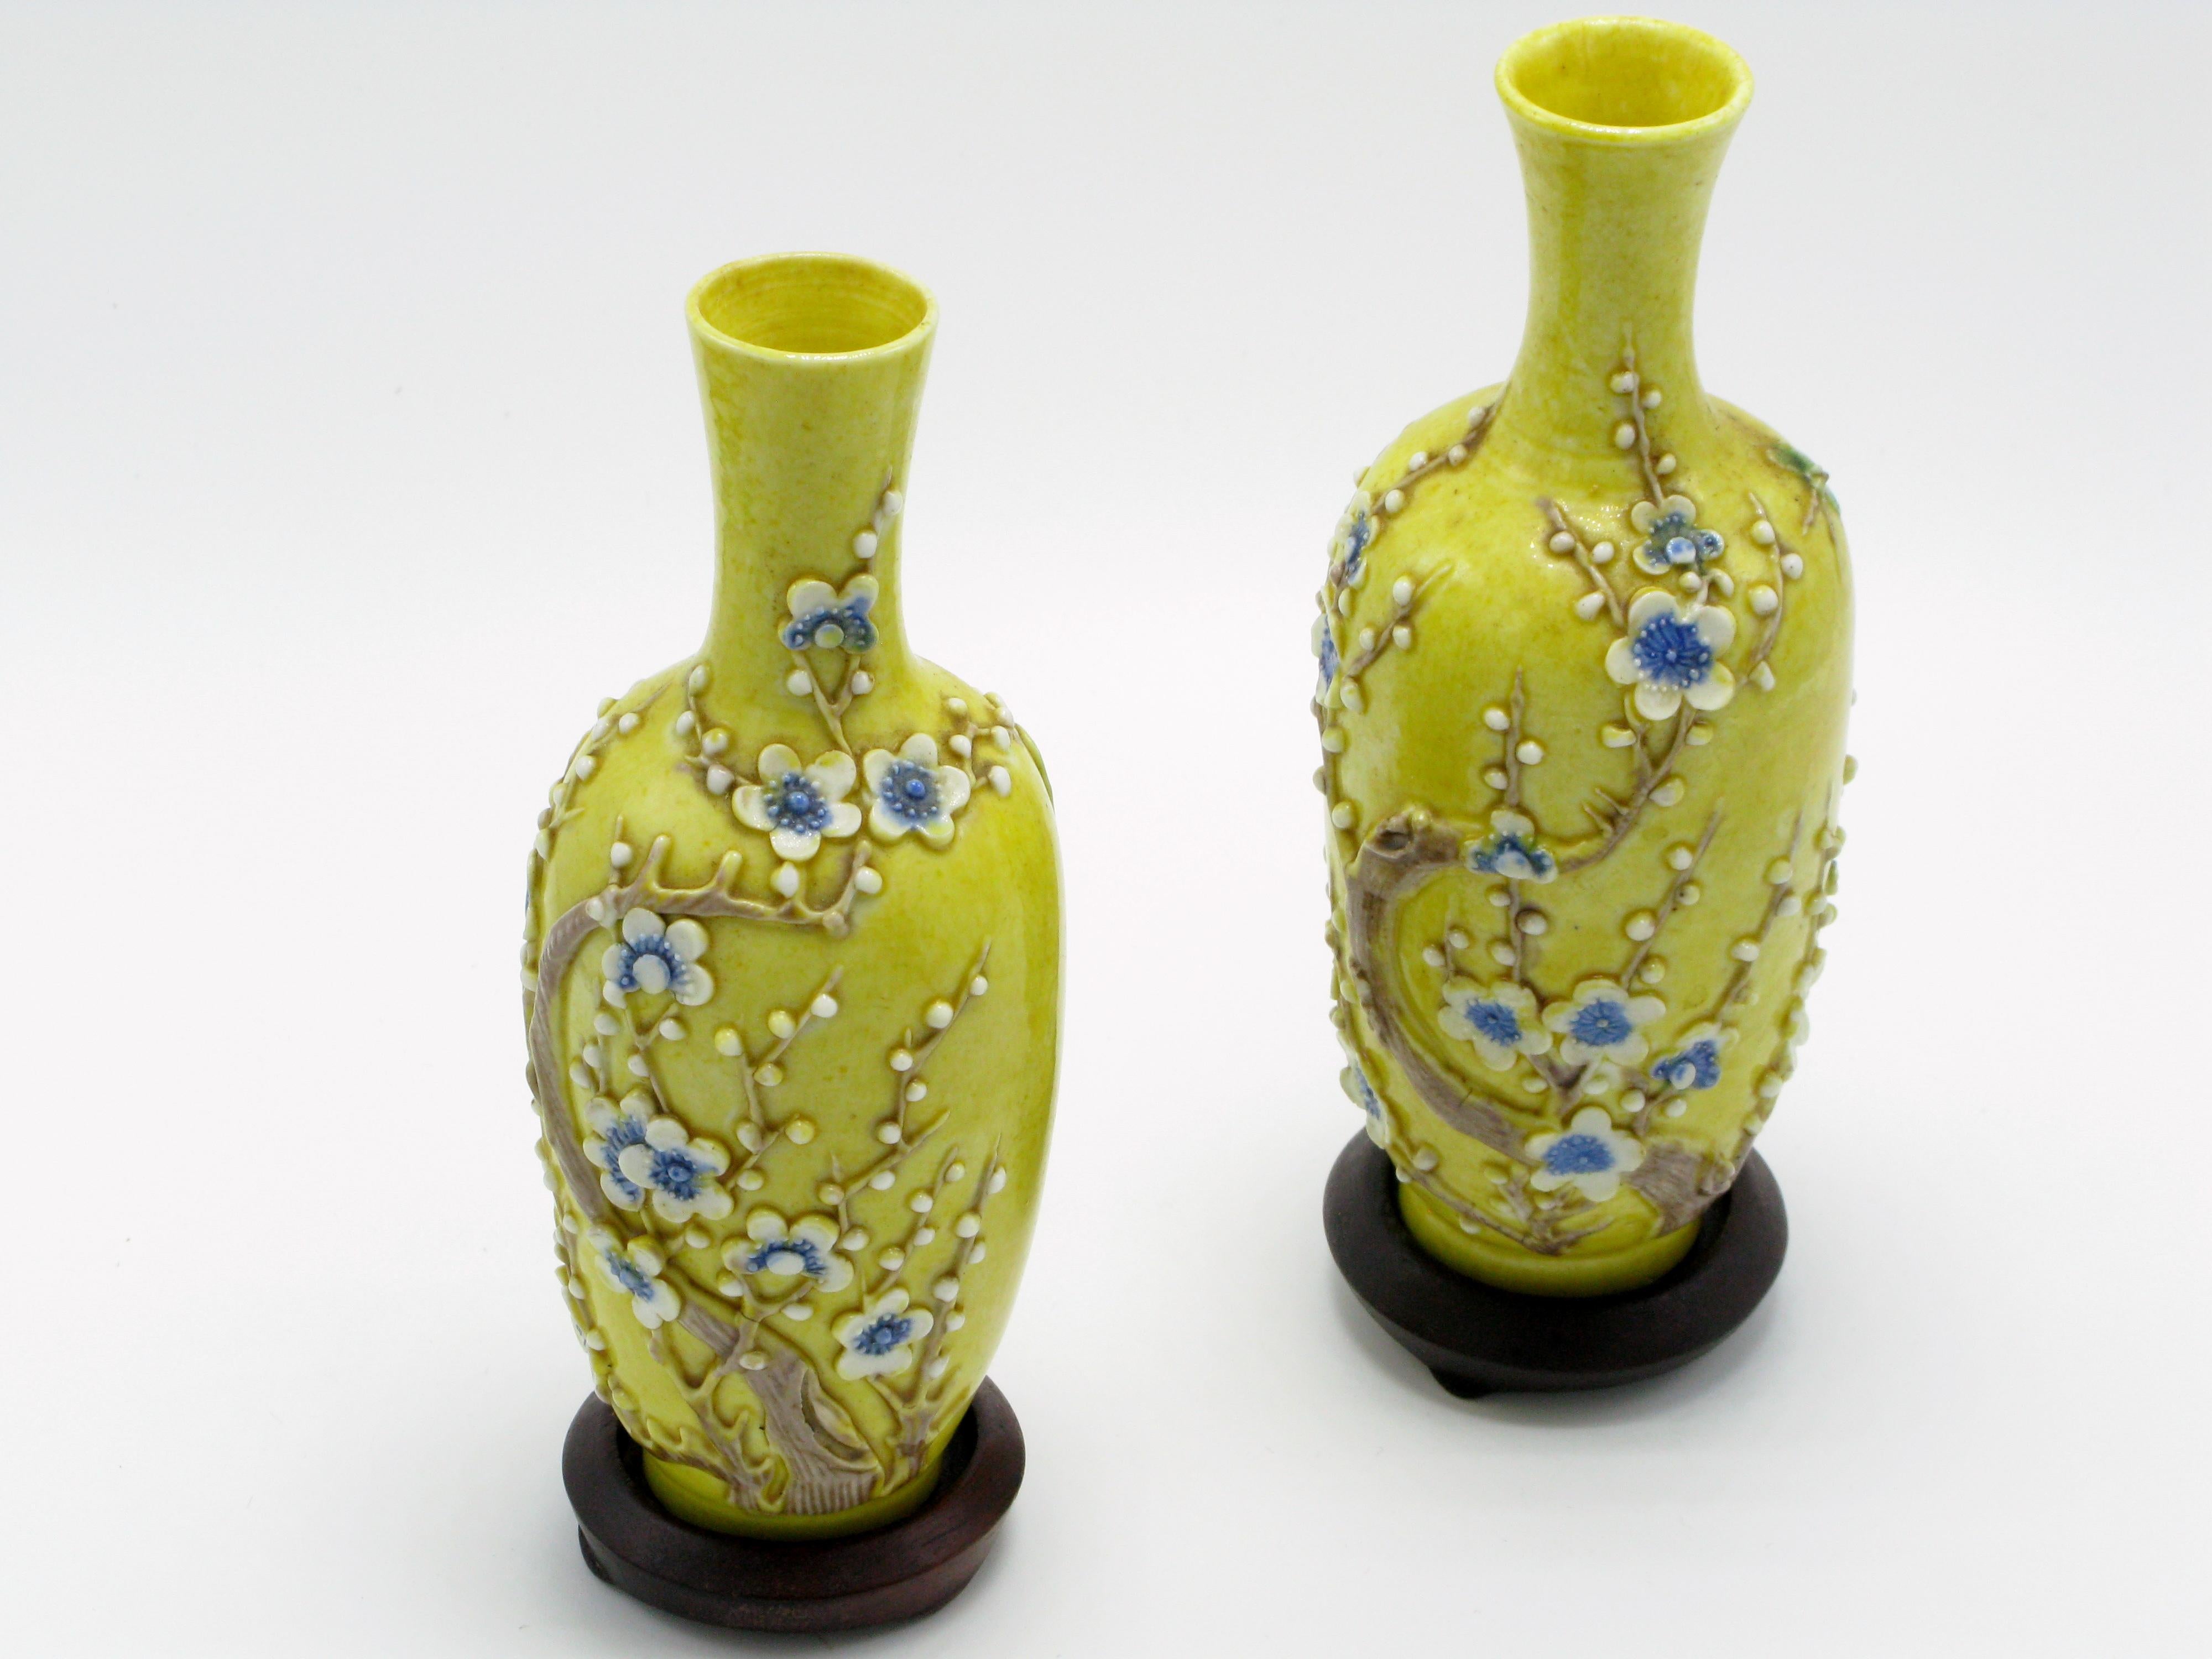 Lovely pair of miniature Chinese yellow ground porcelain vases with applied plum blossom trees and butterflies. Each Stand on circular rosewood bases.
Marked China engraved into bottom and date late 19th early 20th century, circa 1890-1920.
Bottle